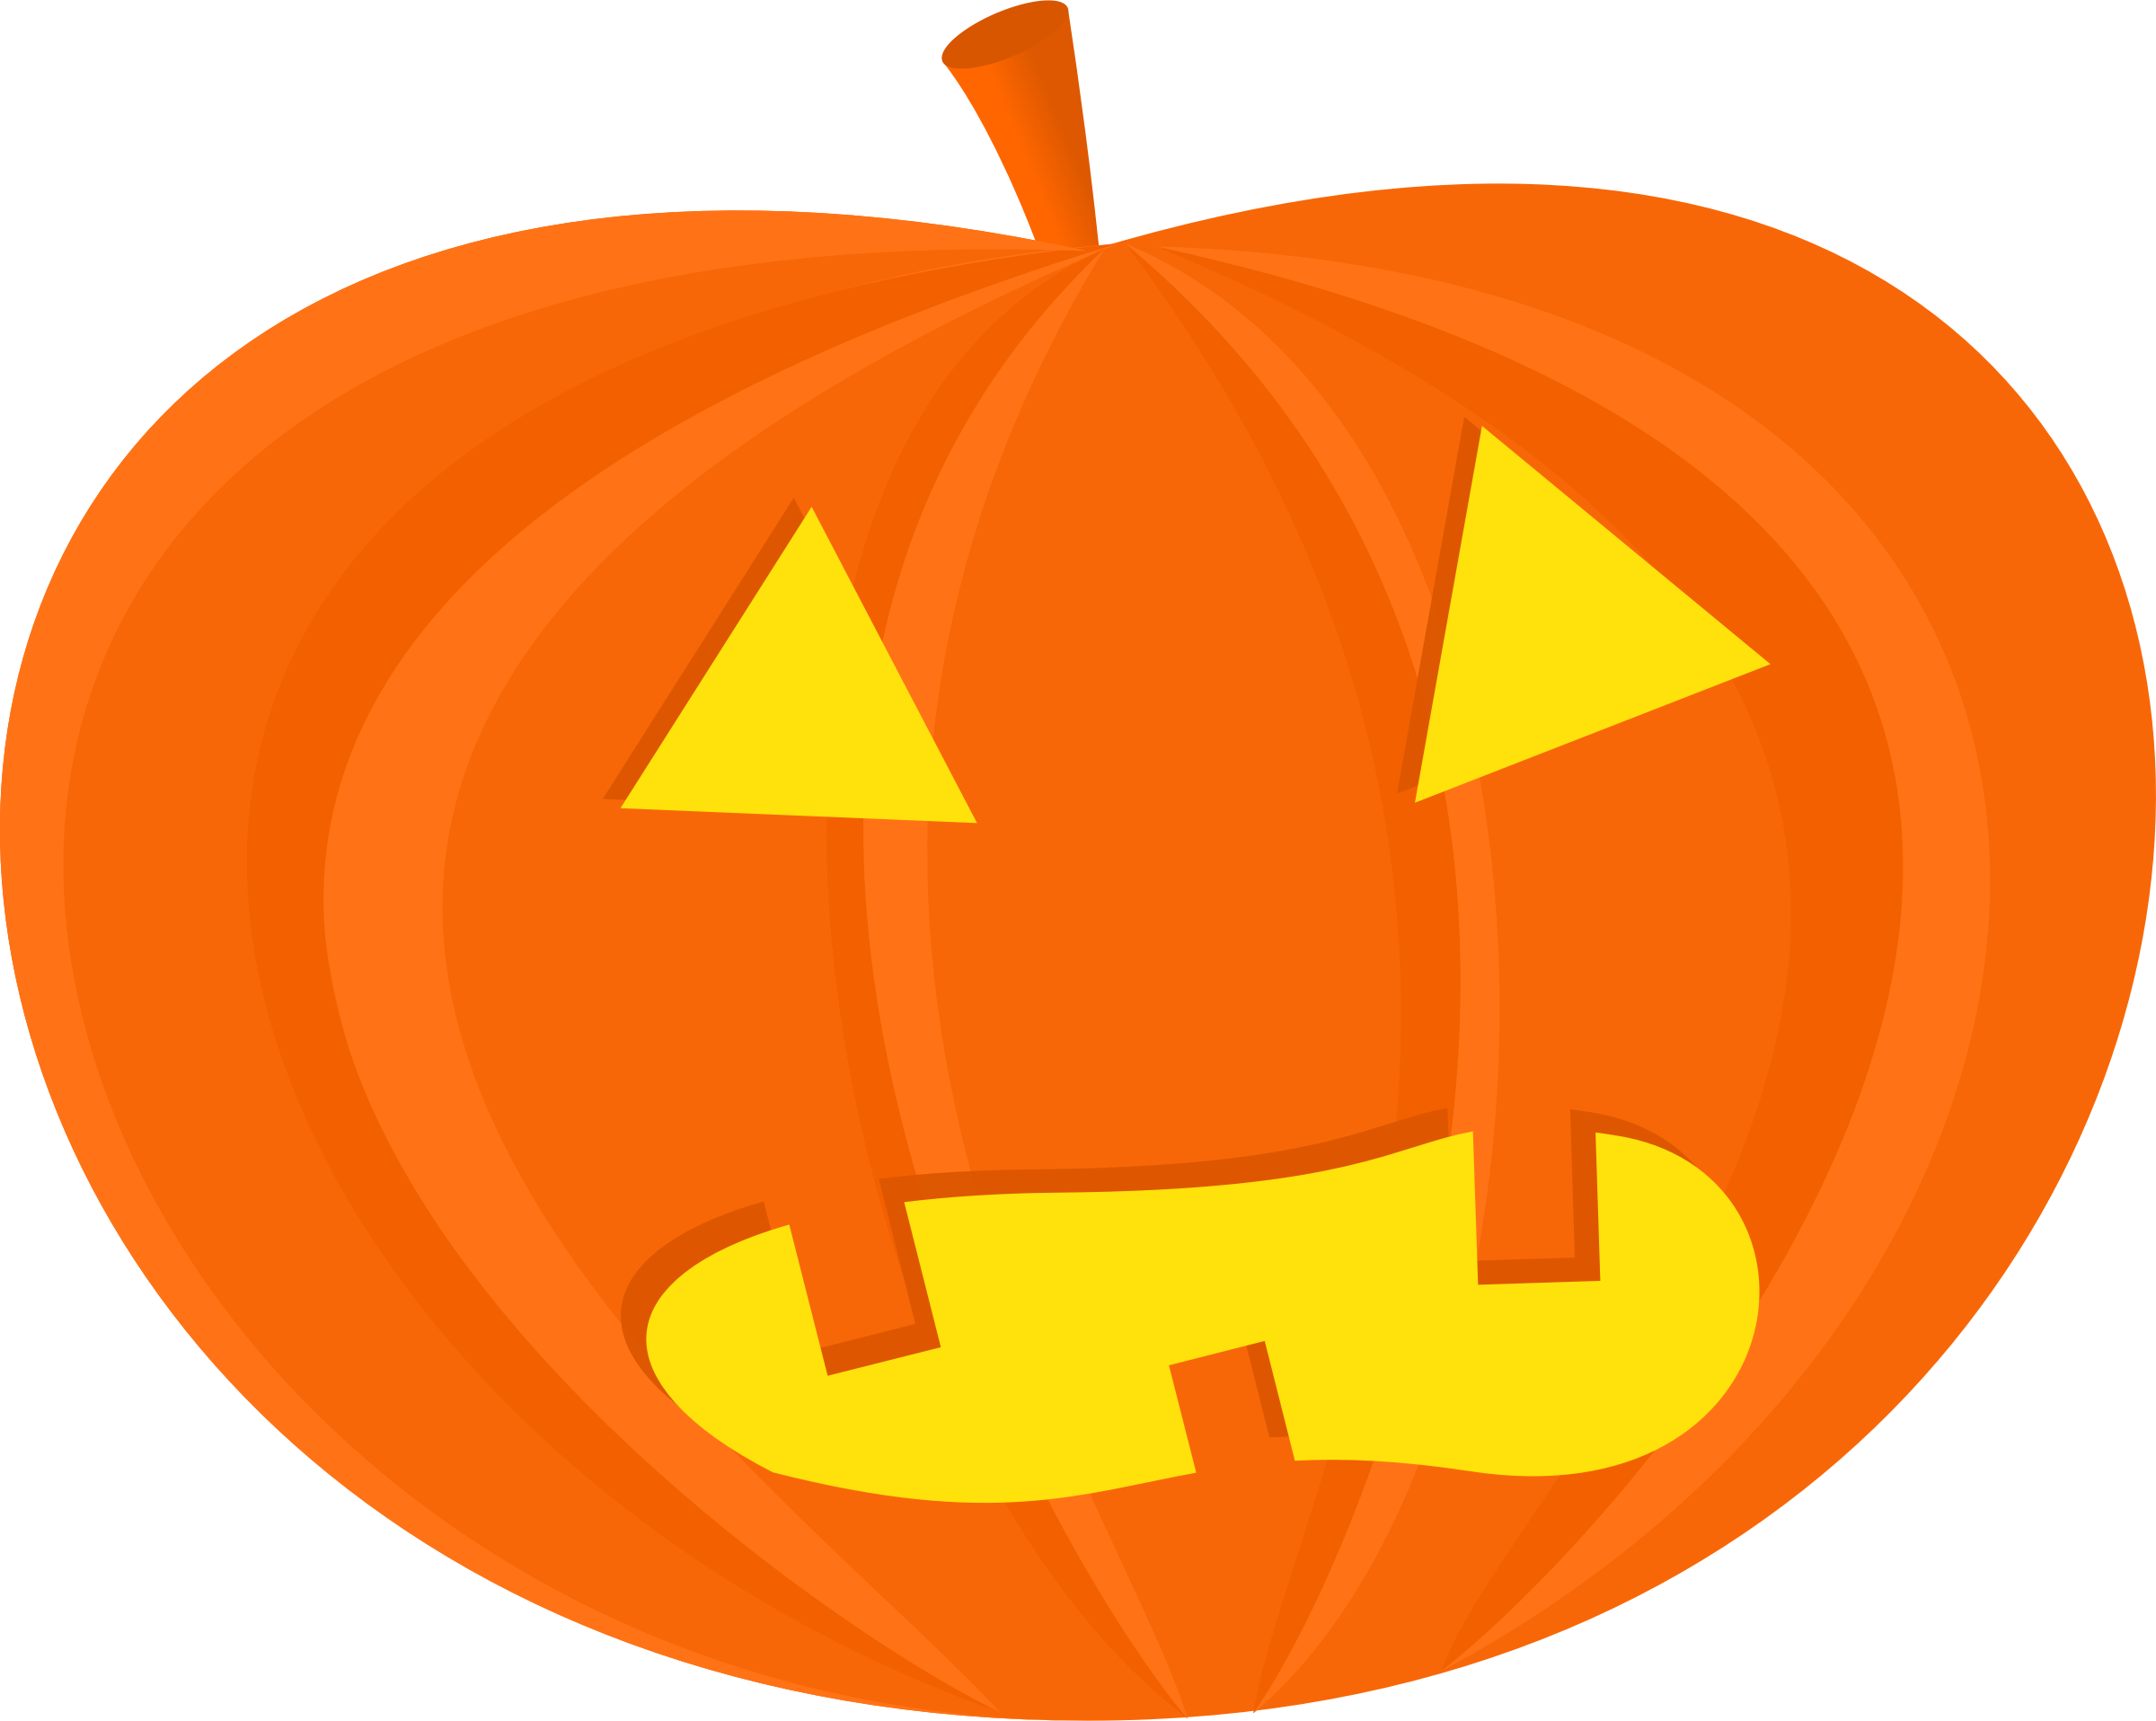 Free Pumpkin High Resolution Clip Art | All Free Picture